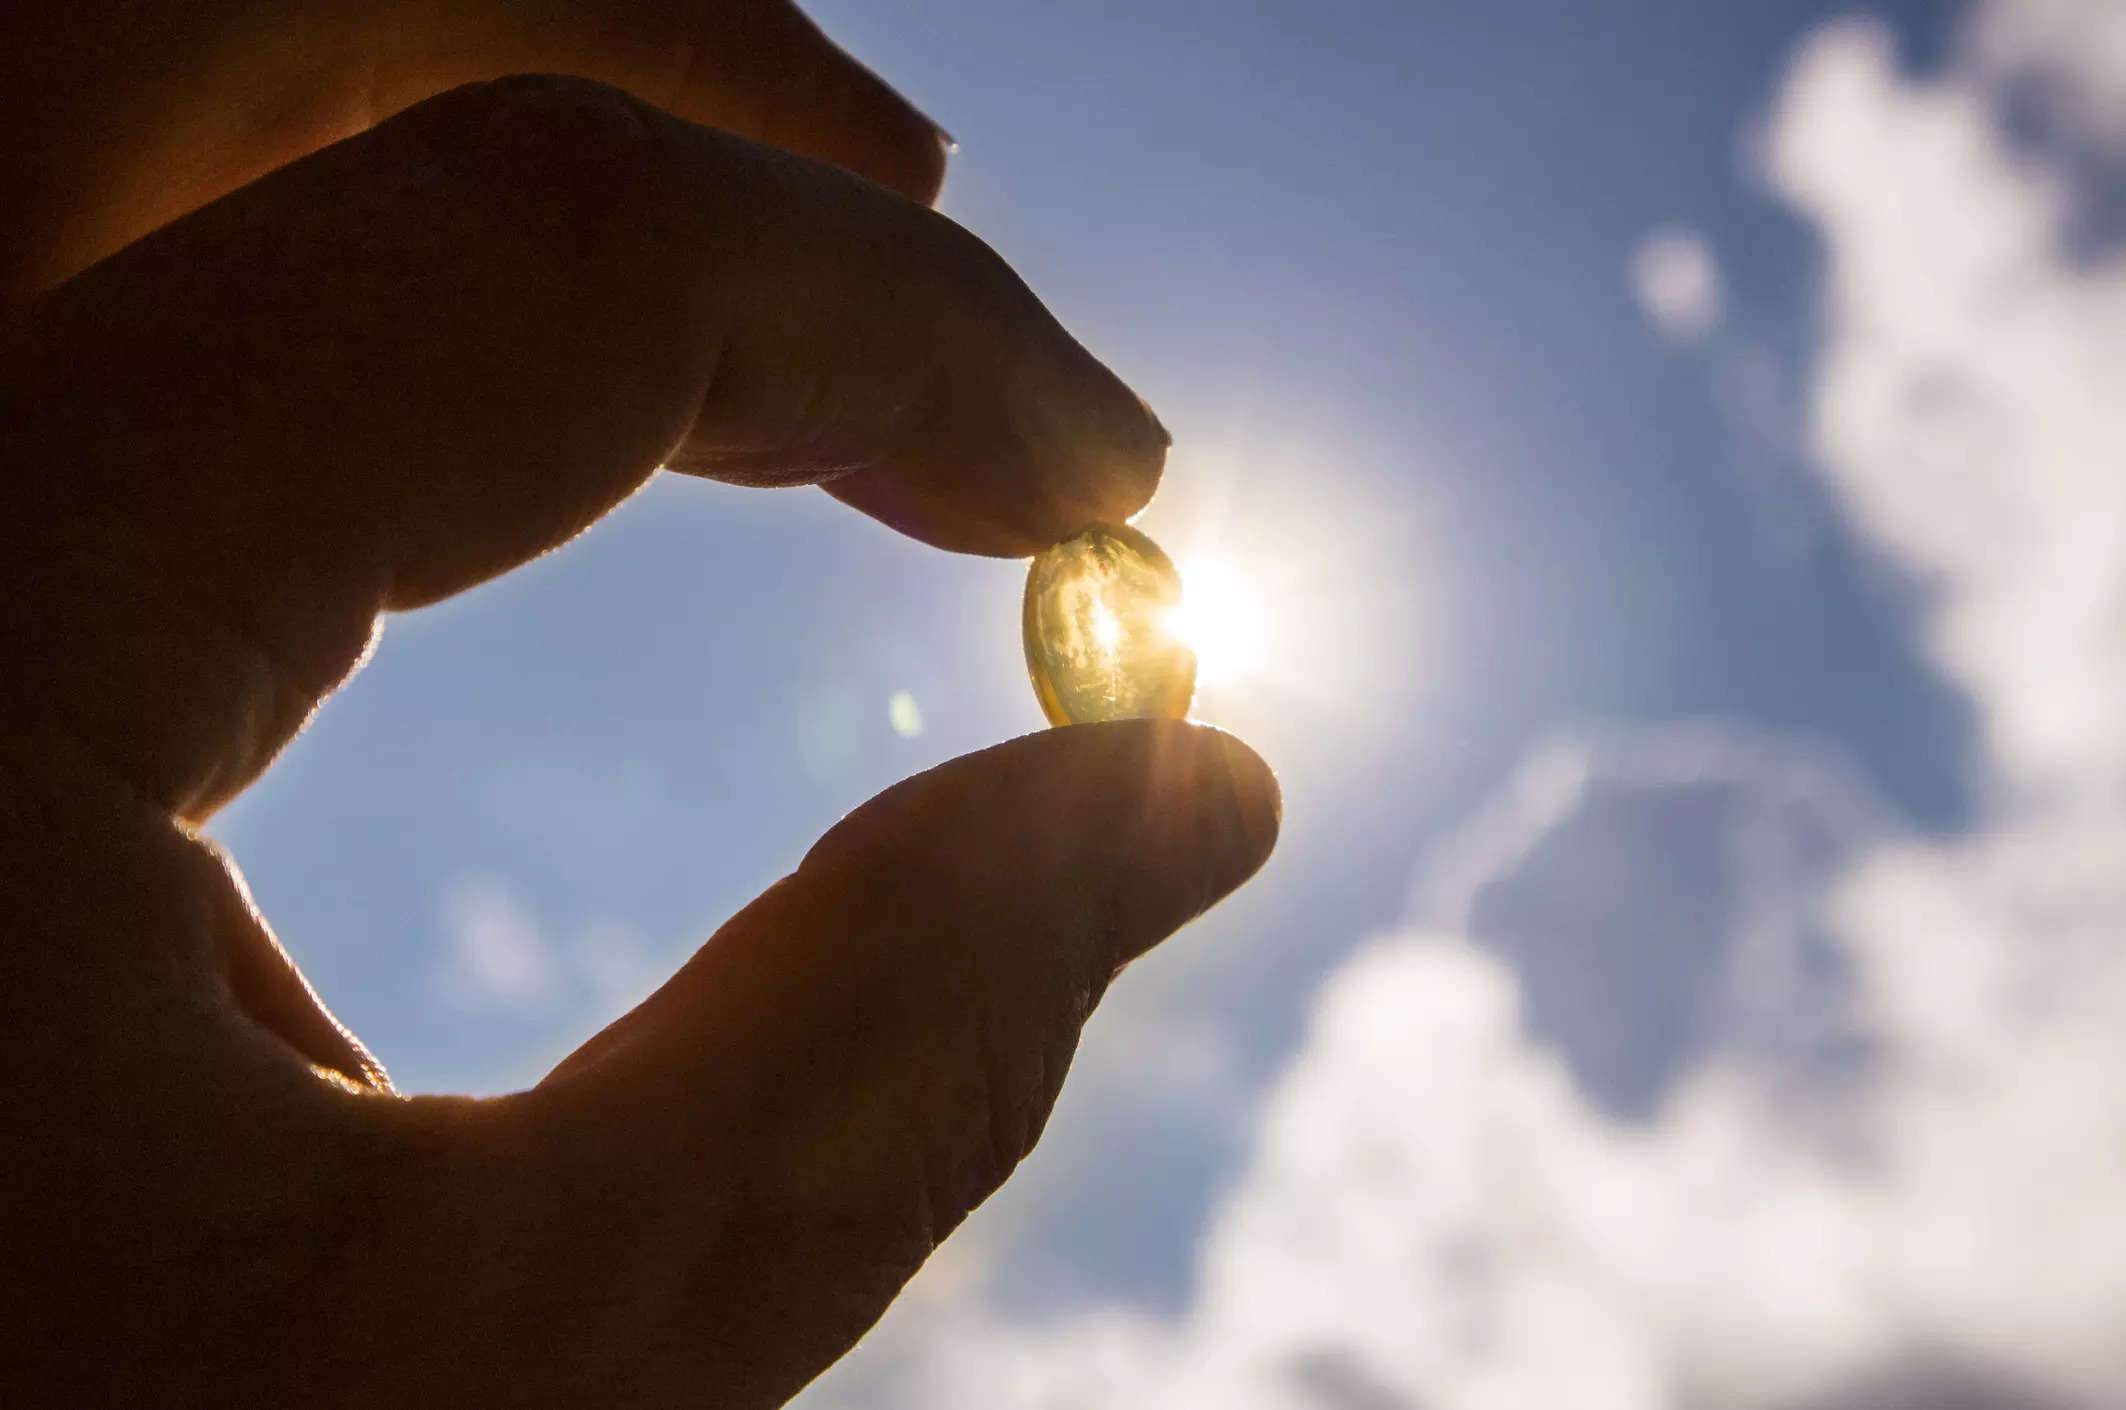 Daily vitamin D supplements do not seem to prevent the development of Type 2 diabetes in people already at high risk of the condition, finds a study.